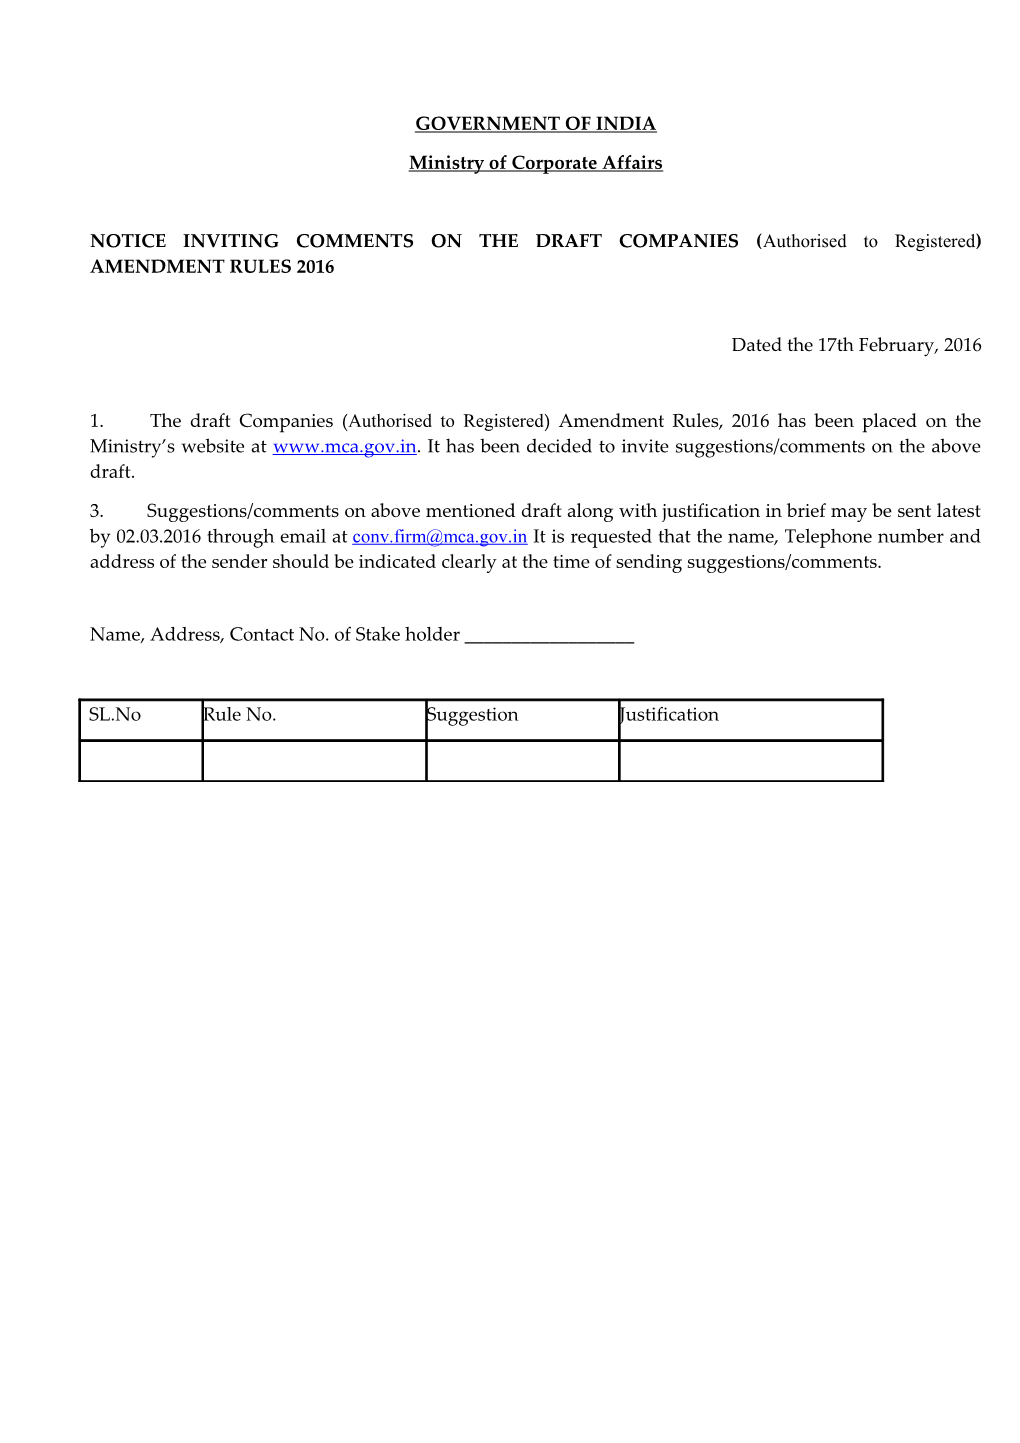 NOTICE INVITING COMMENTS on the DRAFT COMPANIES (Authorised to Registered) AMENDMENT RULES